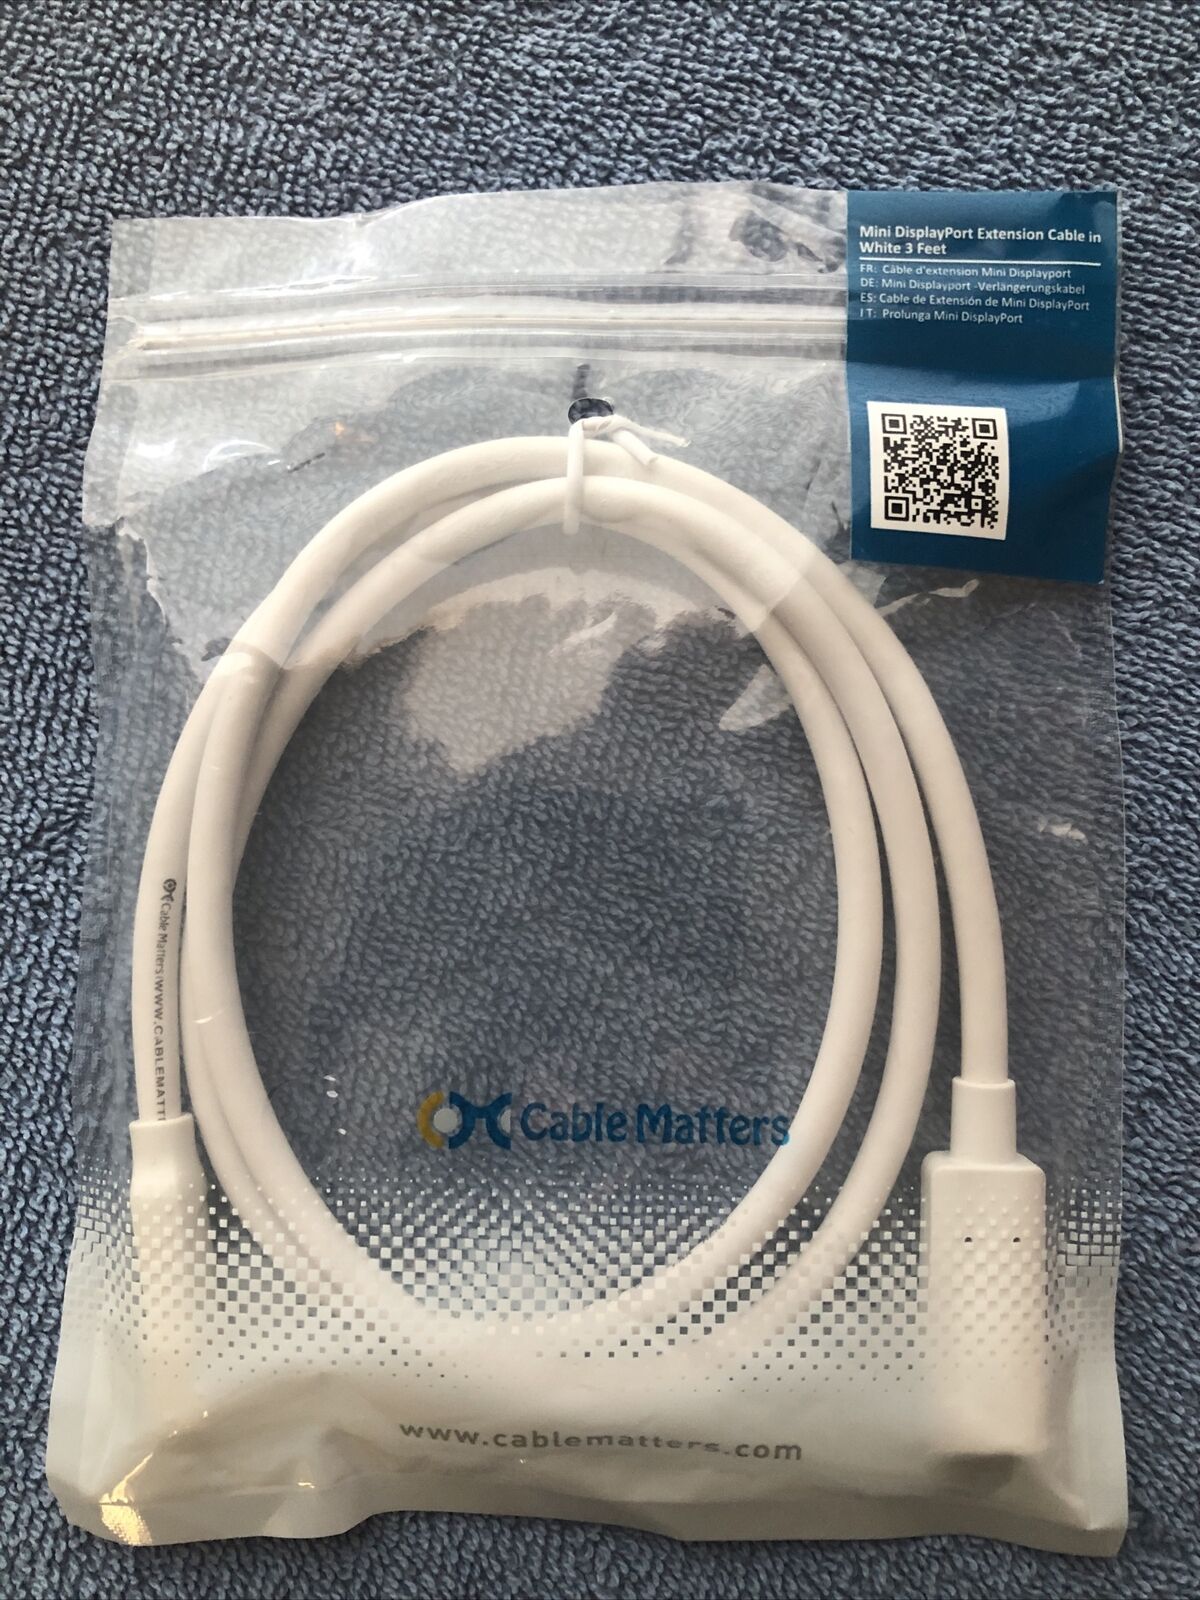 Cable Matters 3ft Mini DisplayPort Male to Female Extension Cable - White 